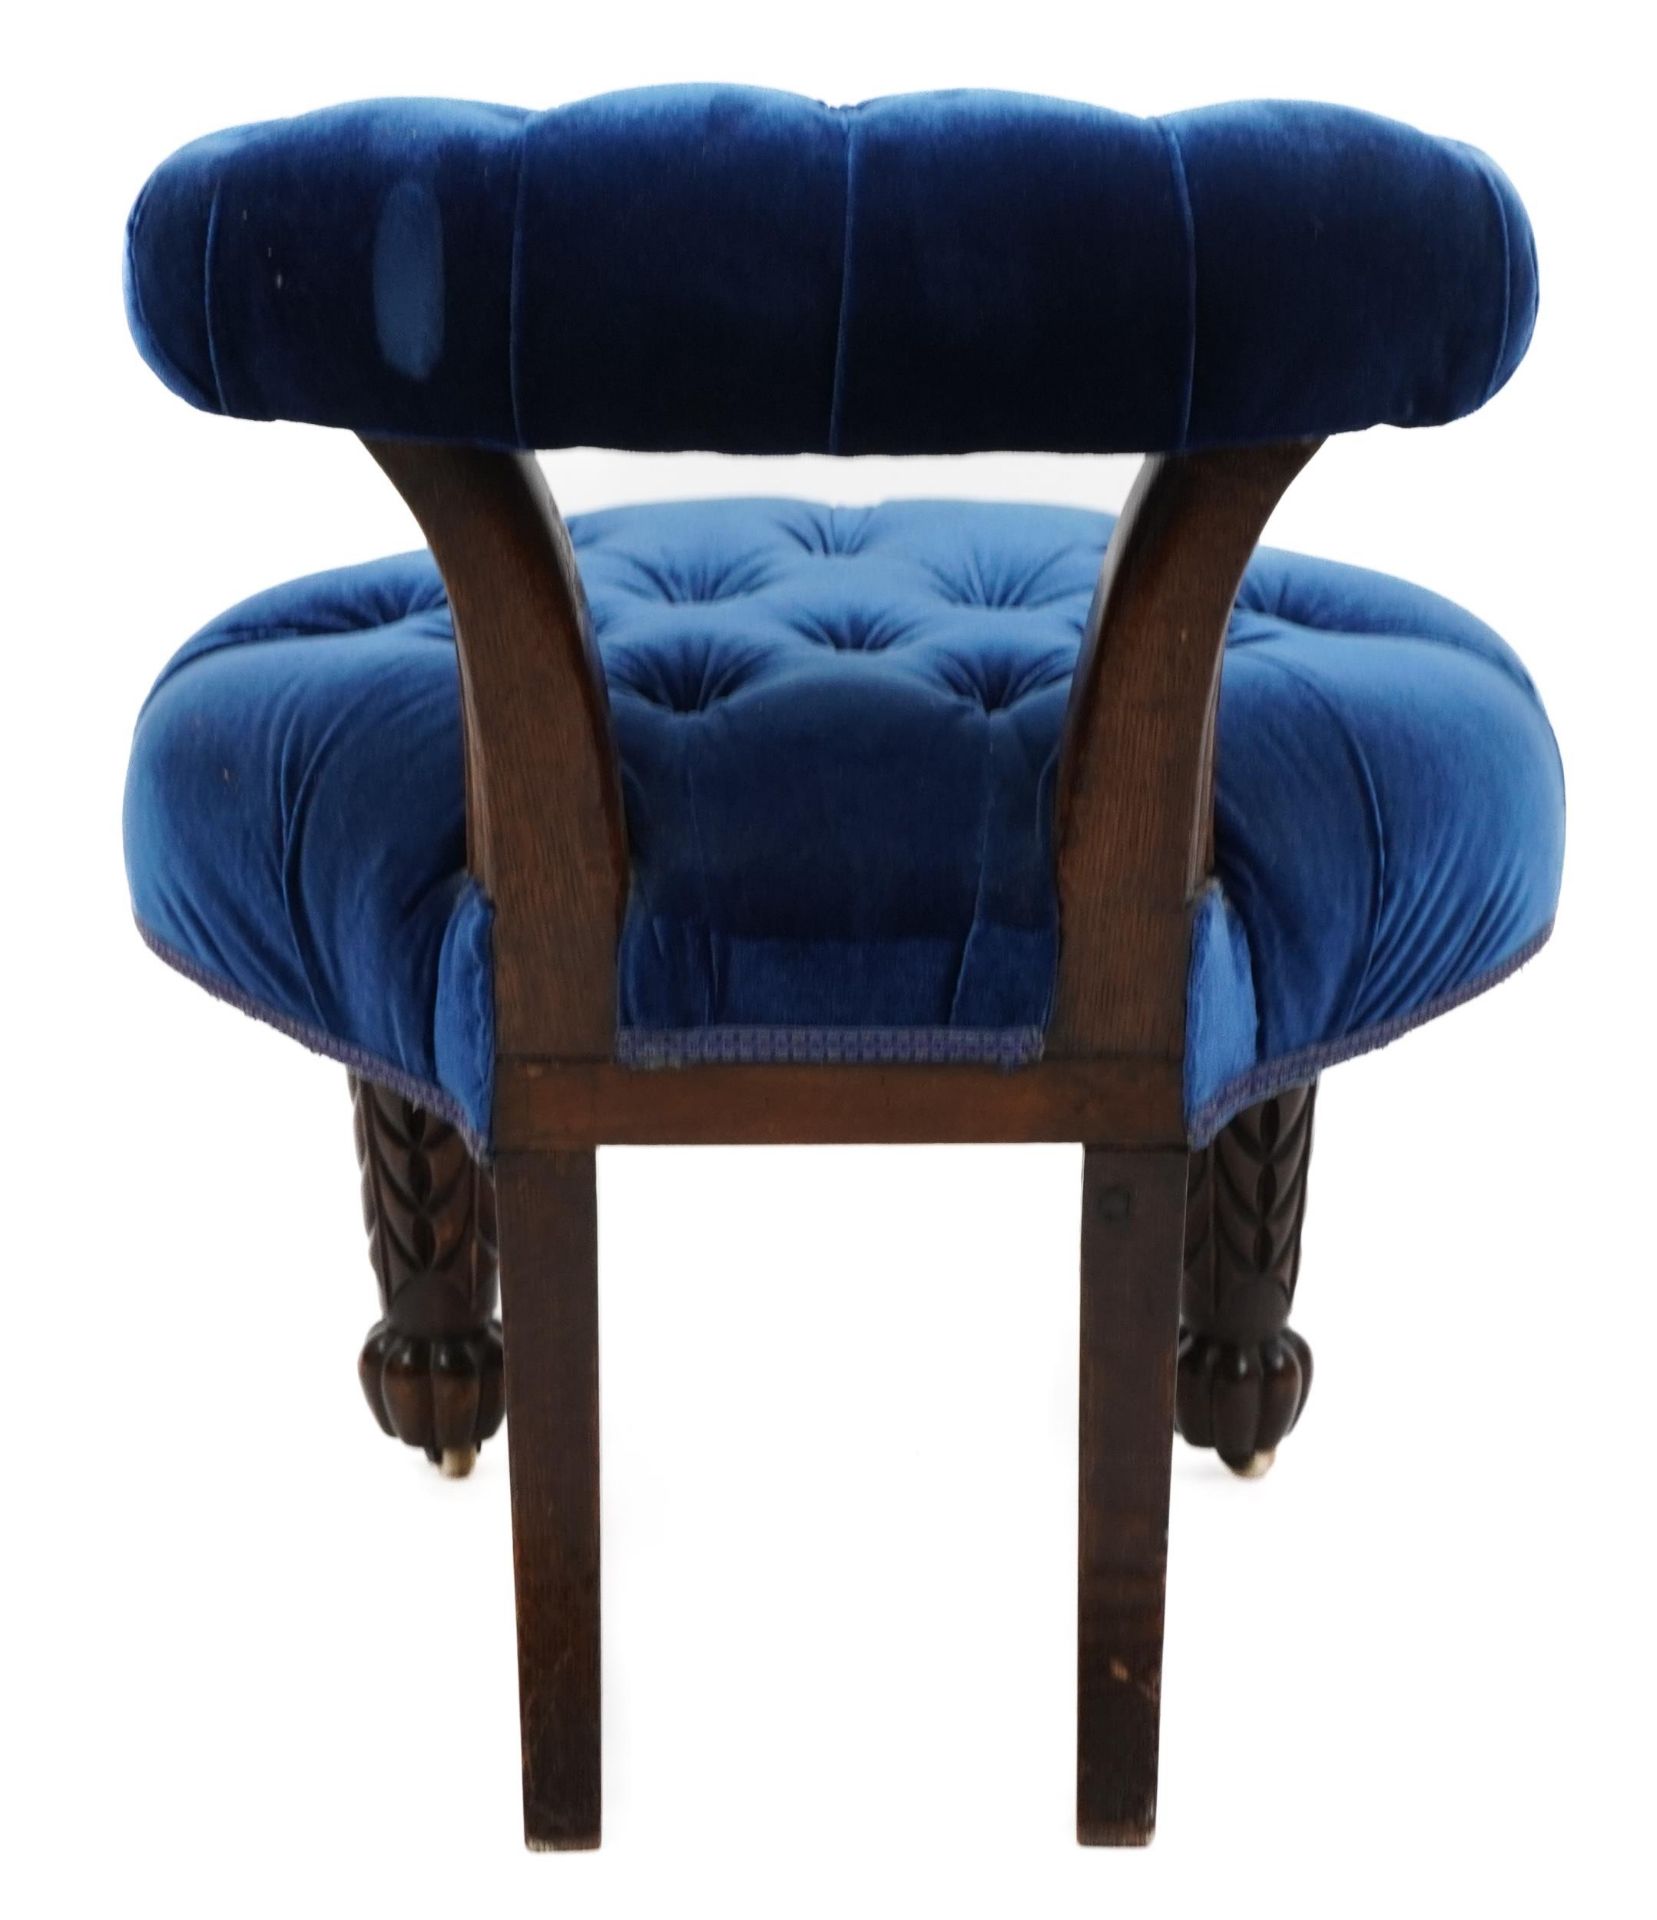 Victorian carved oak bedroom chair with blue button back upholstery, 64cm high : For further - Image 3 of 3